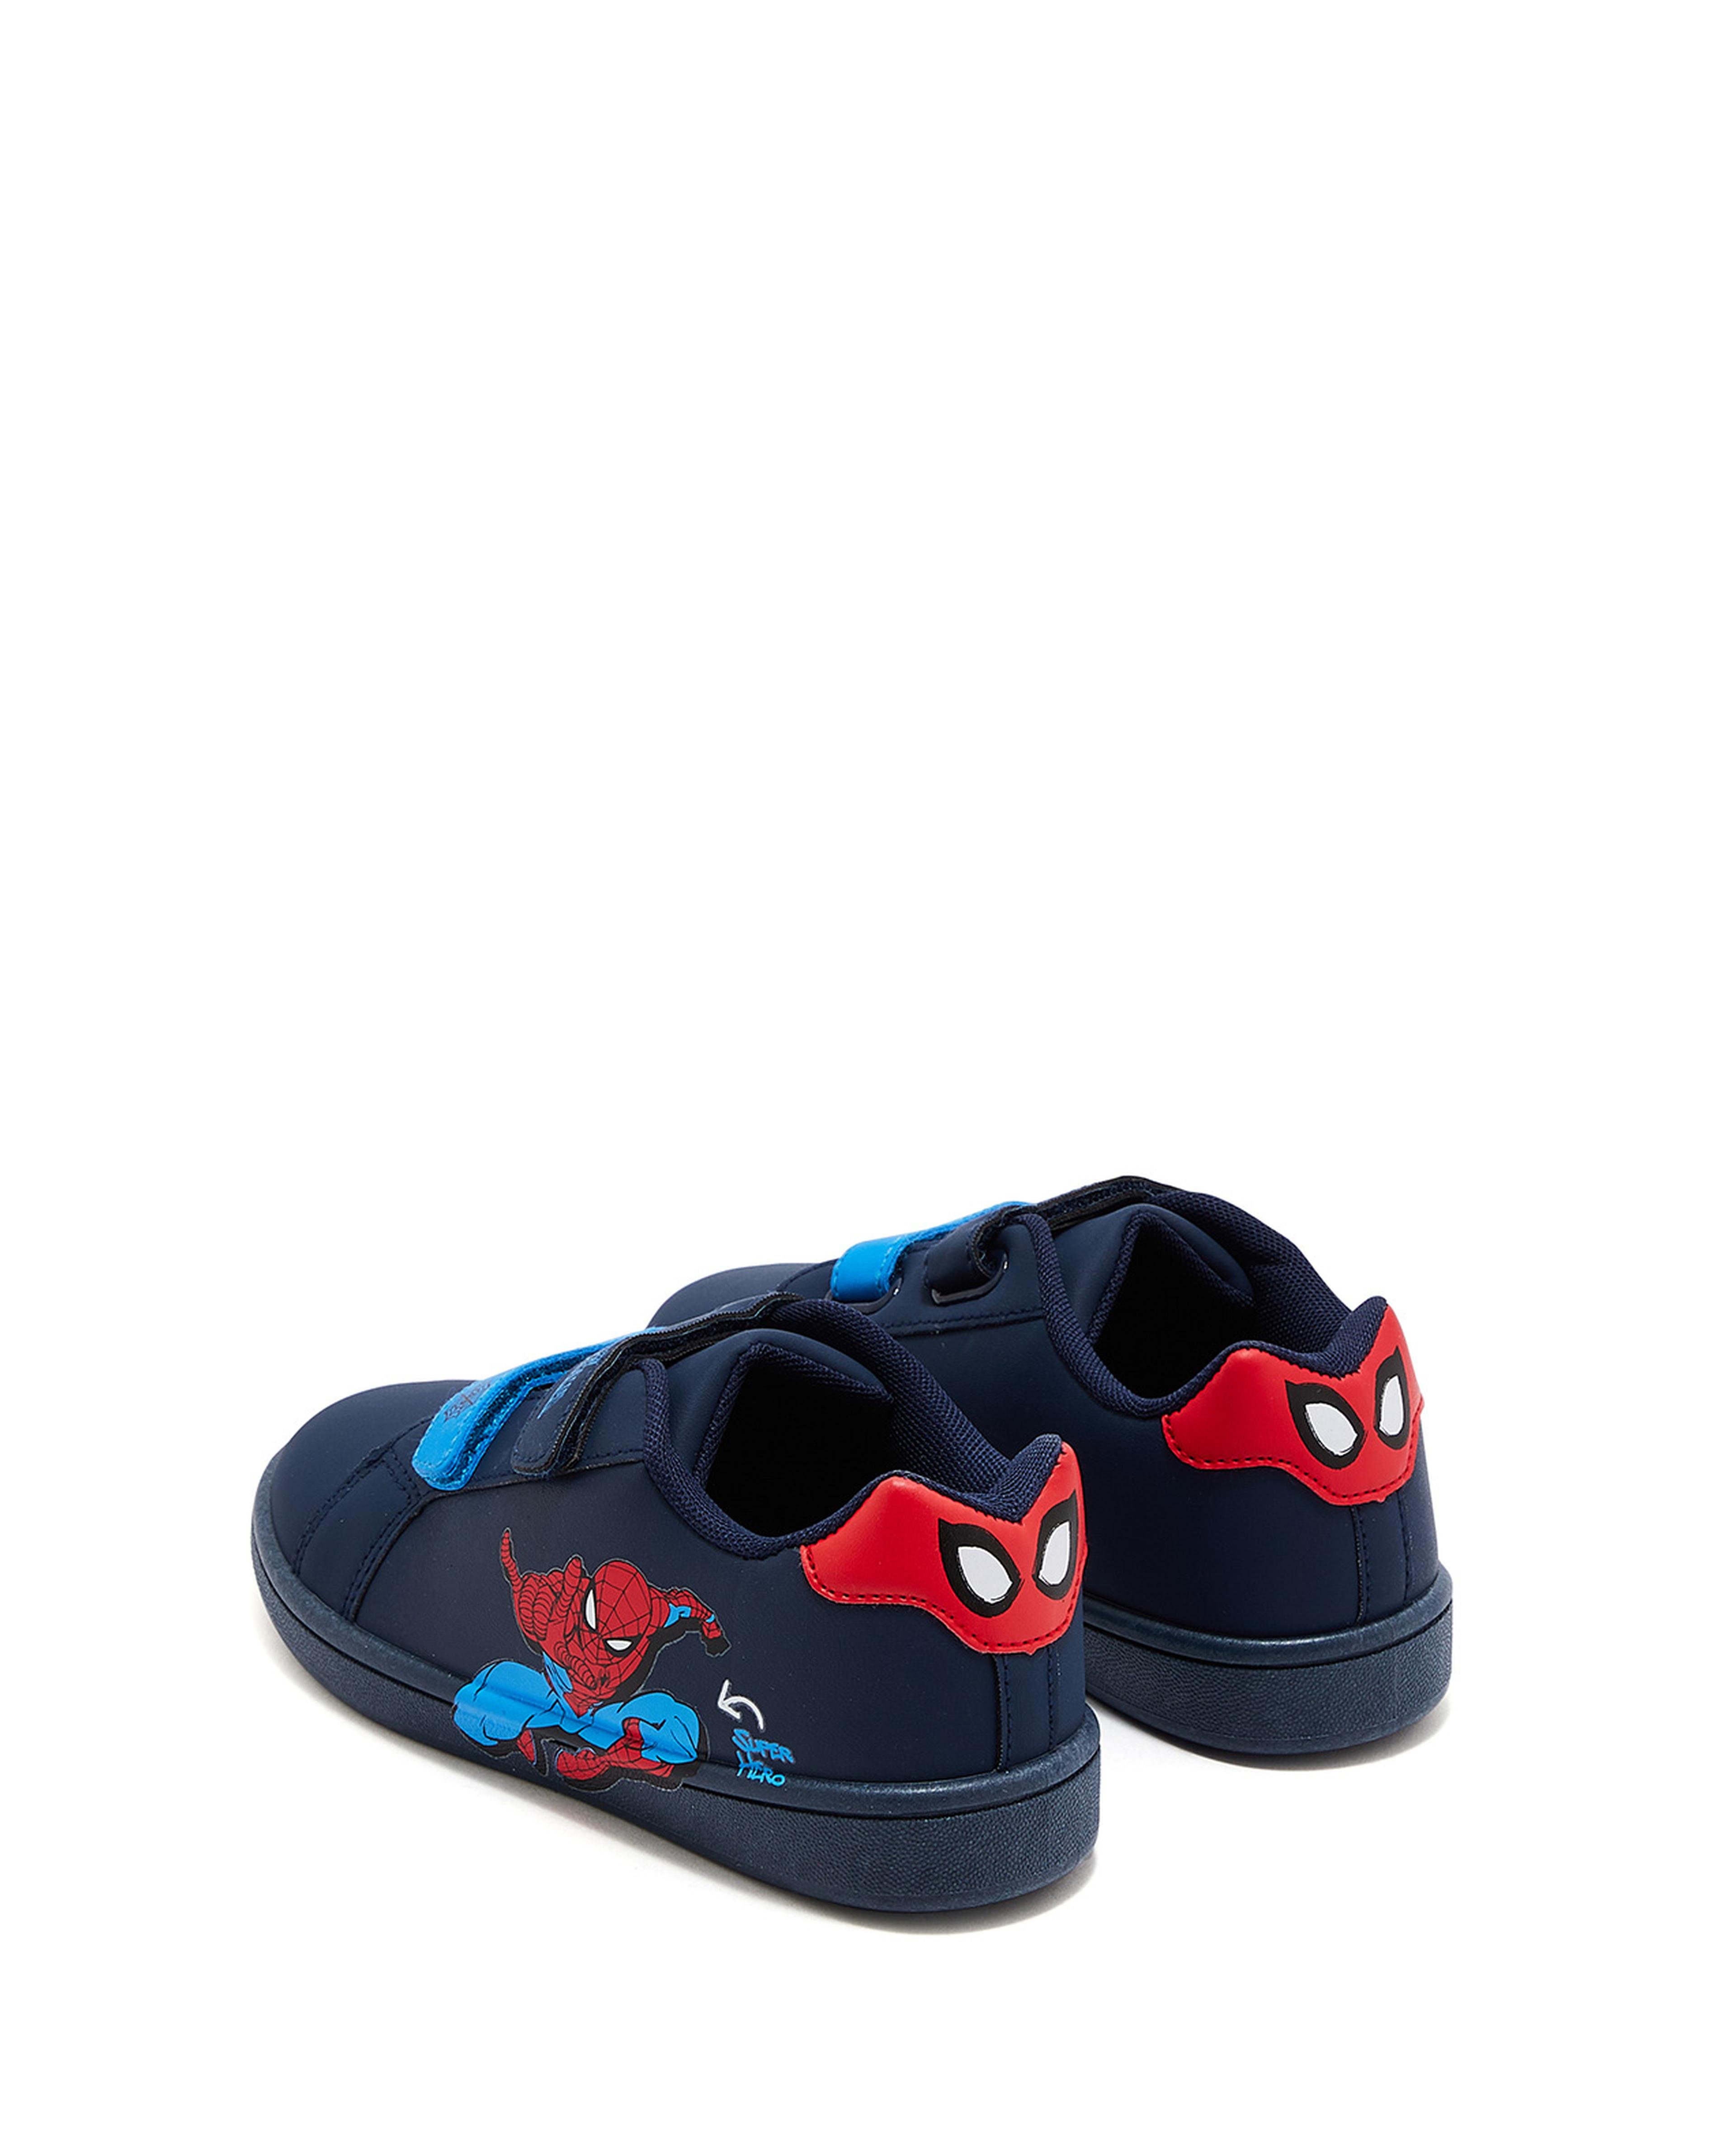 Spider-Man Velcro Shoes